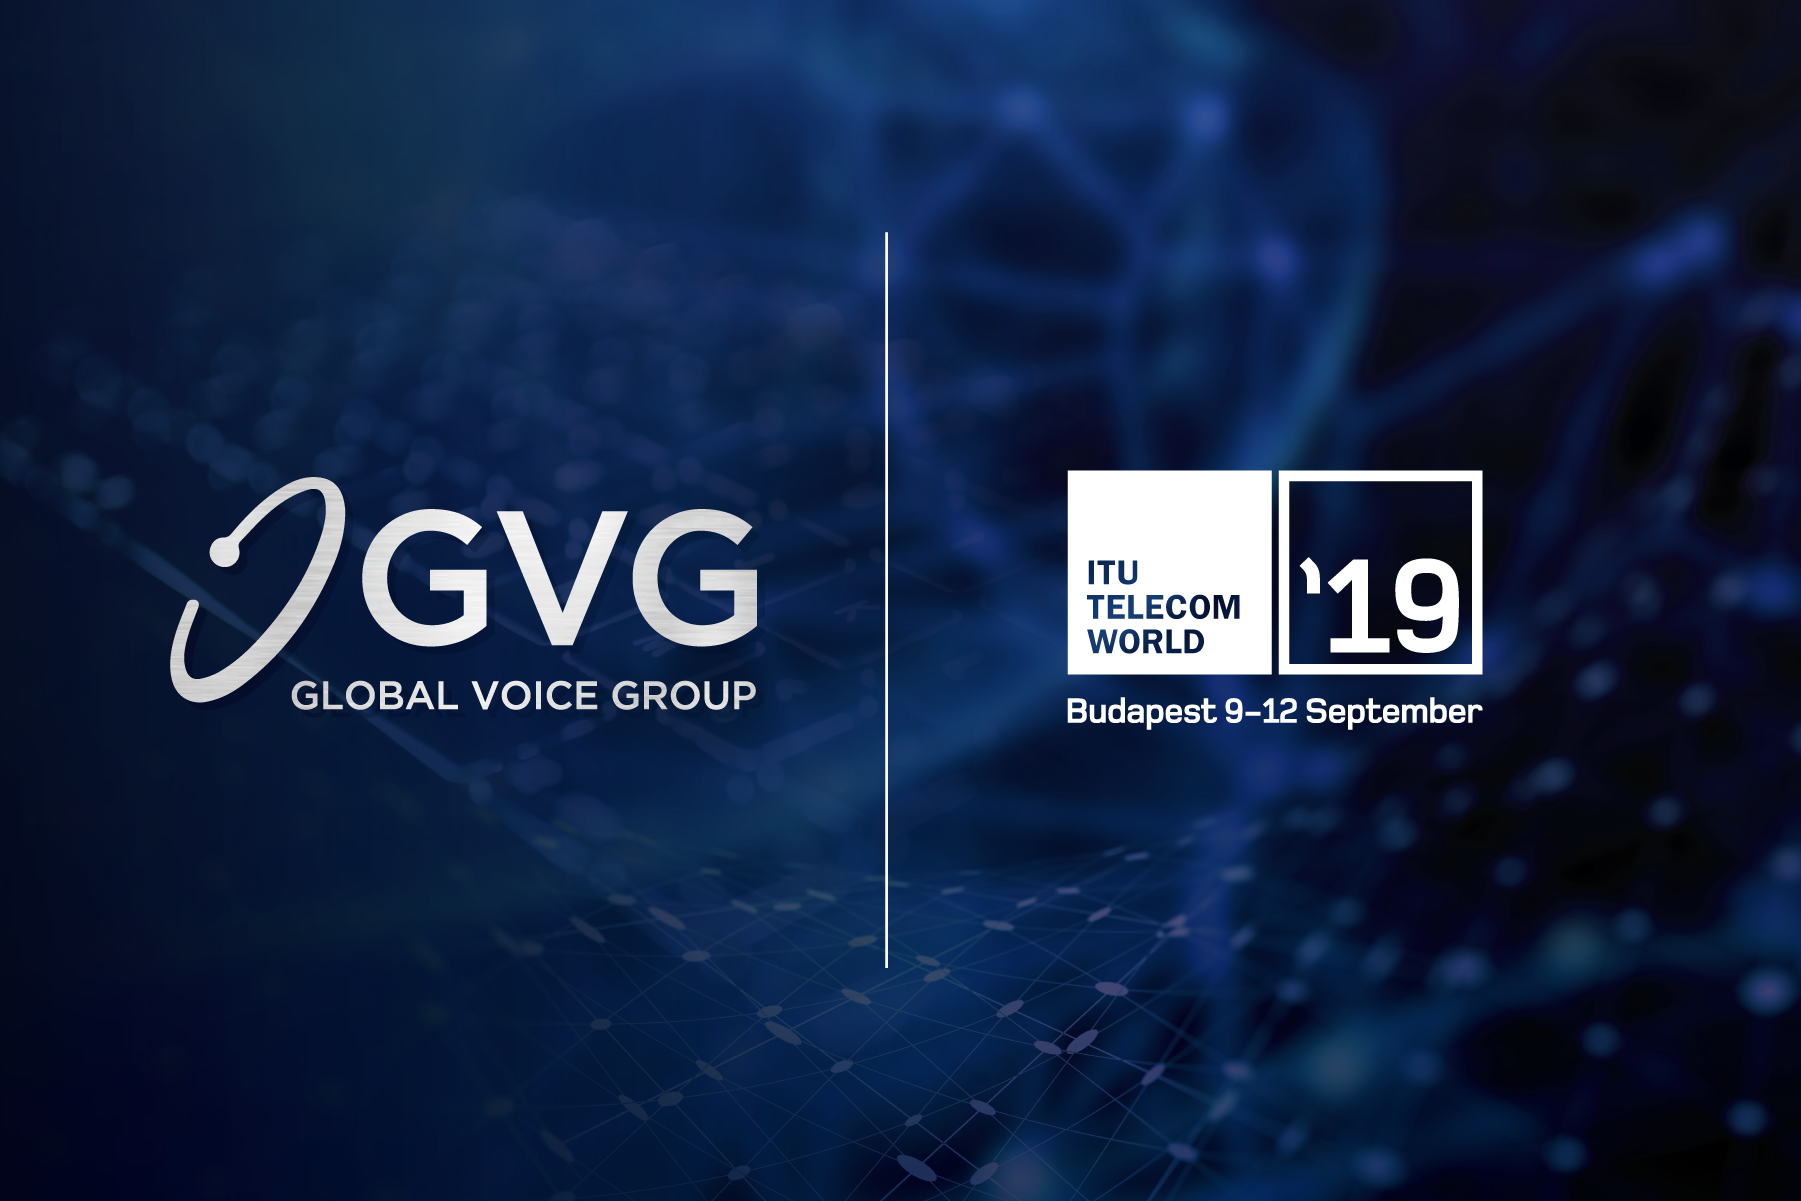 Global Voice Group Promotes Digital Transformation And Inclusion In Budapest